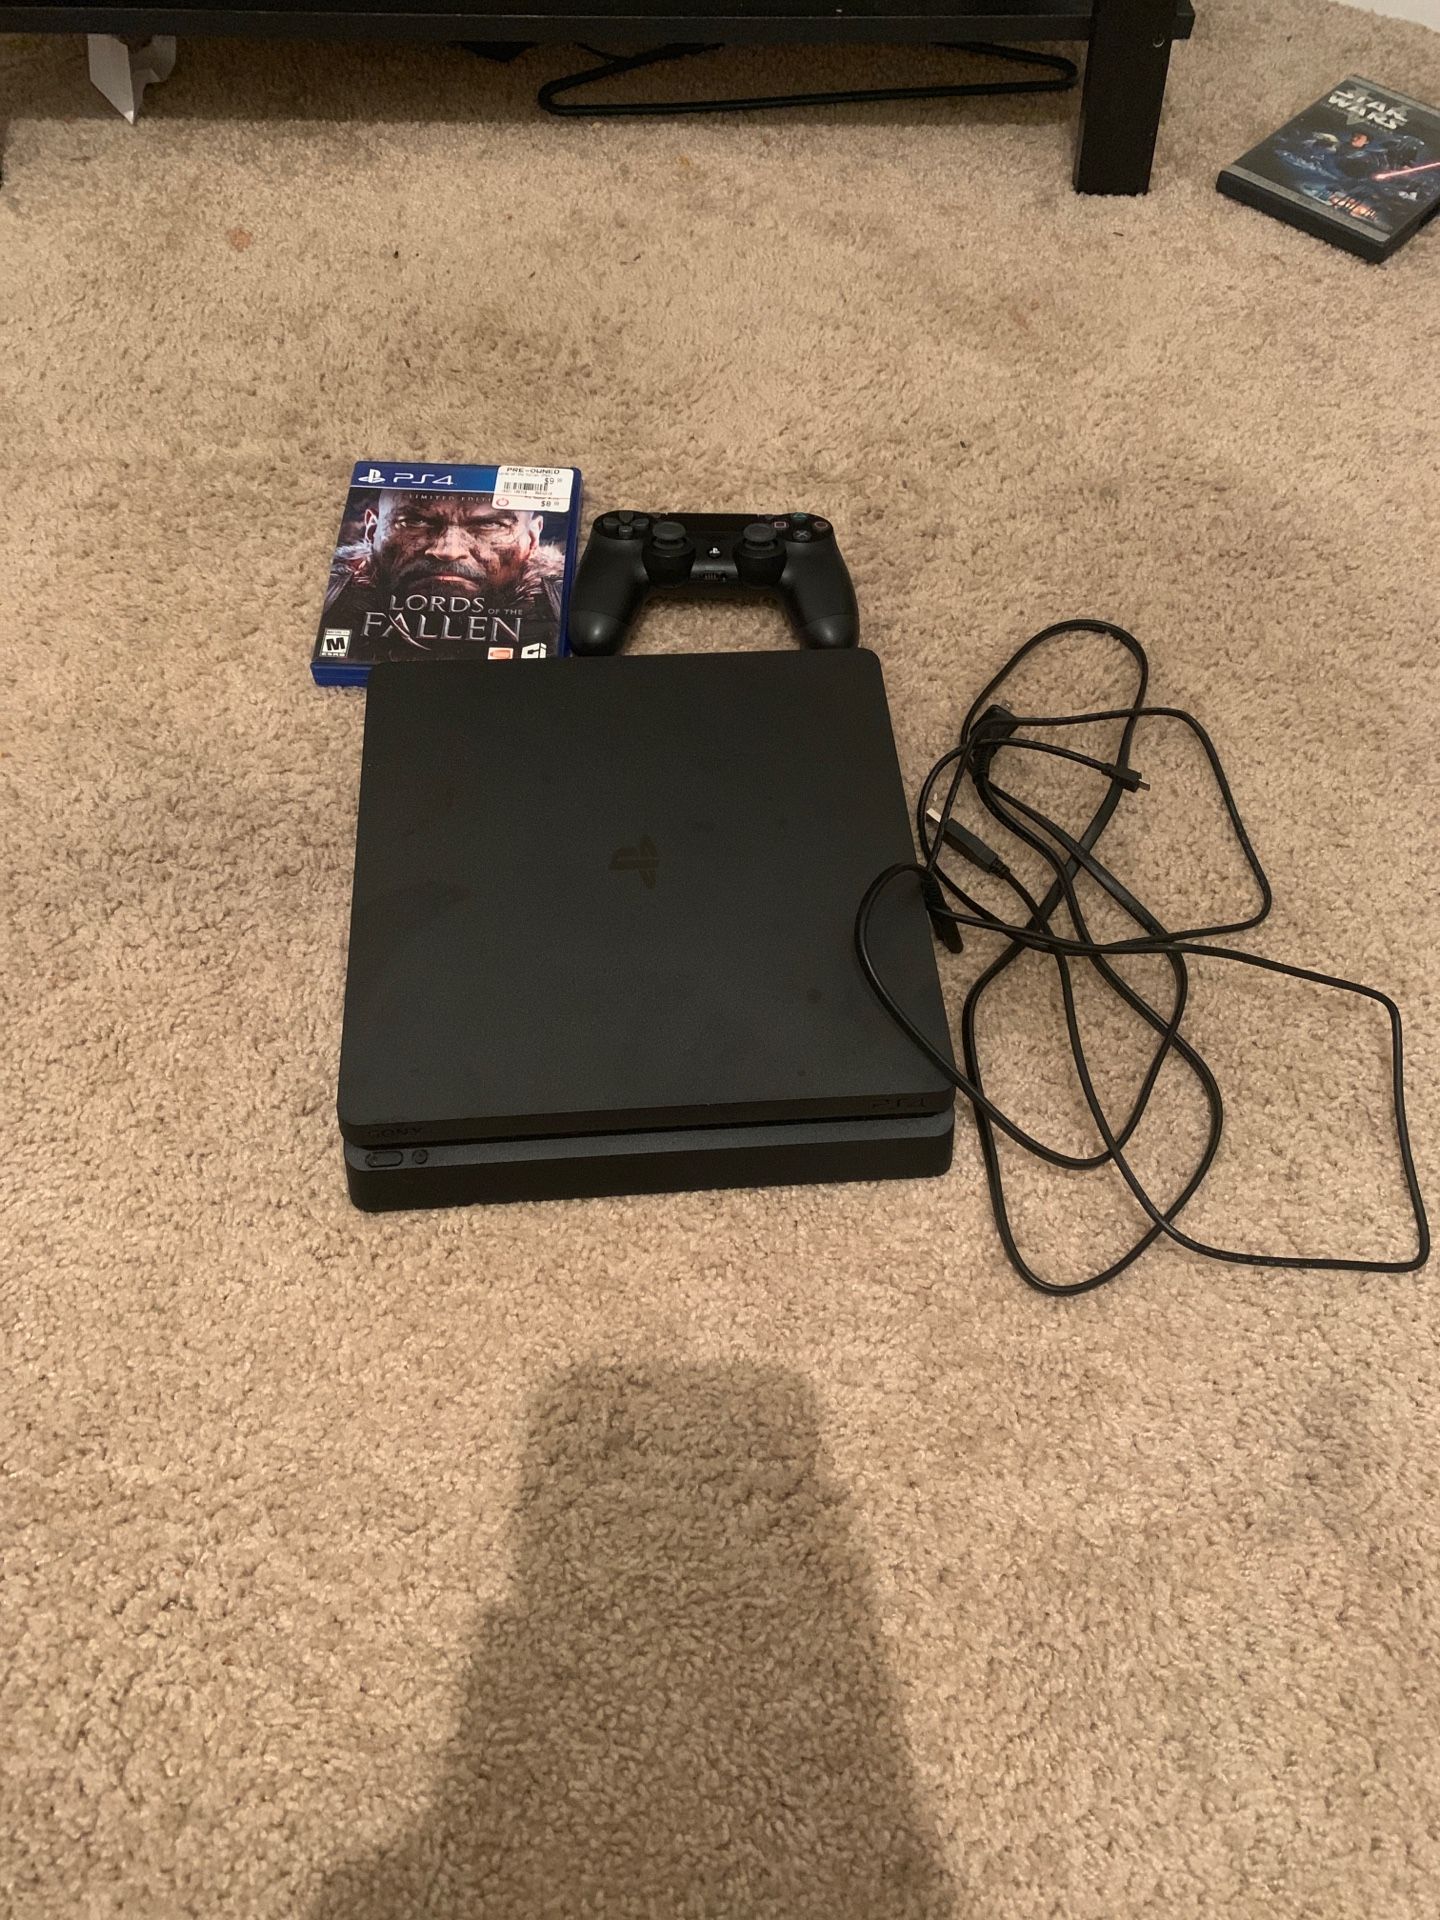 PS4 500 GB, black controller, 1 game.